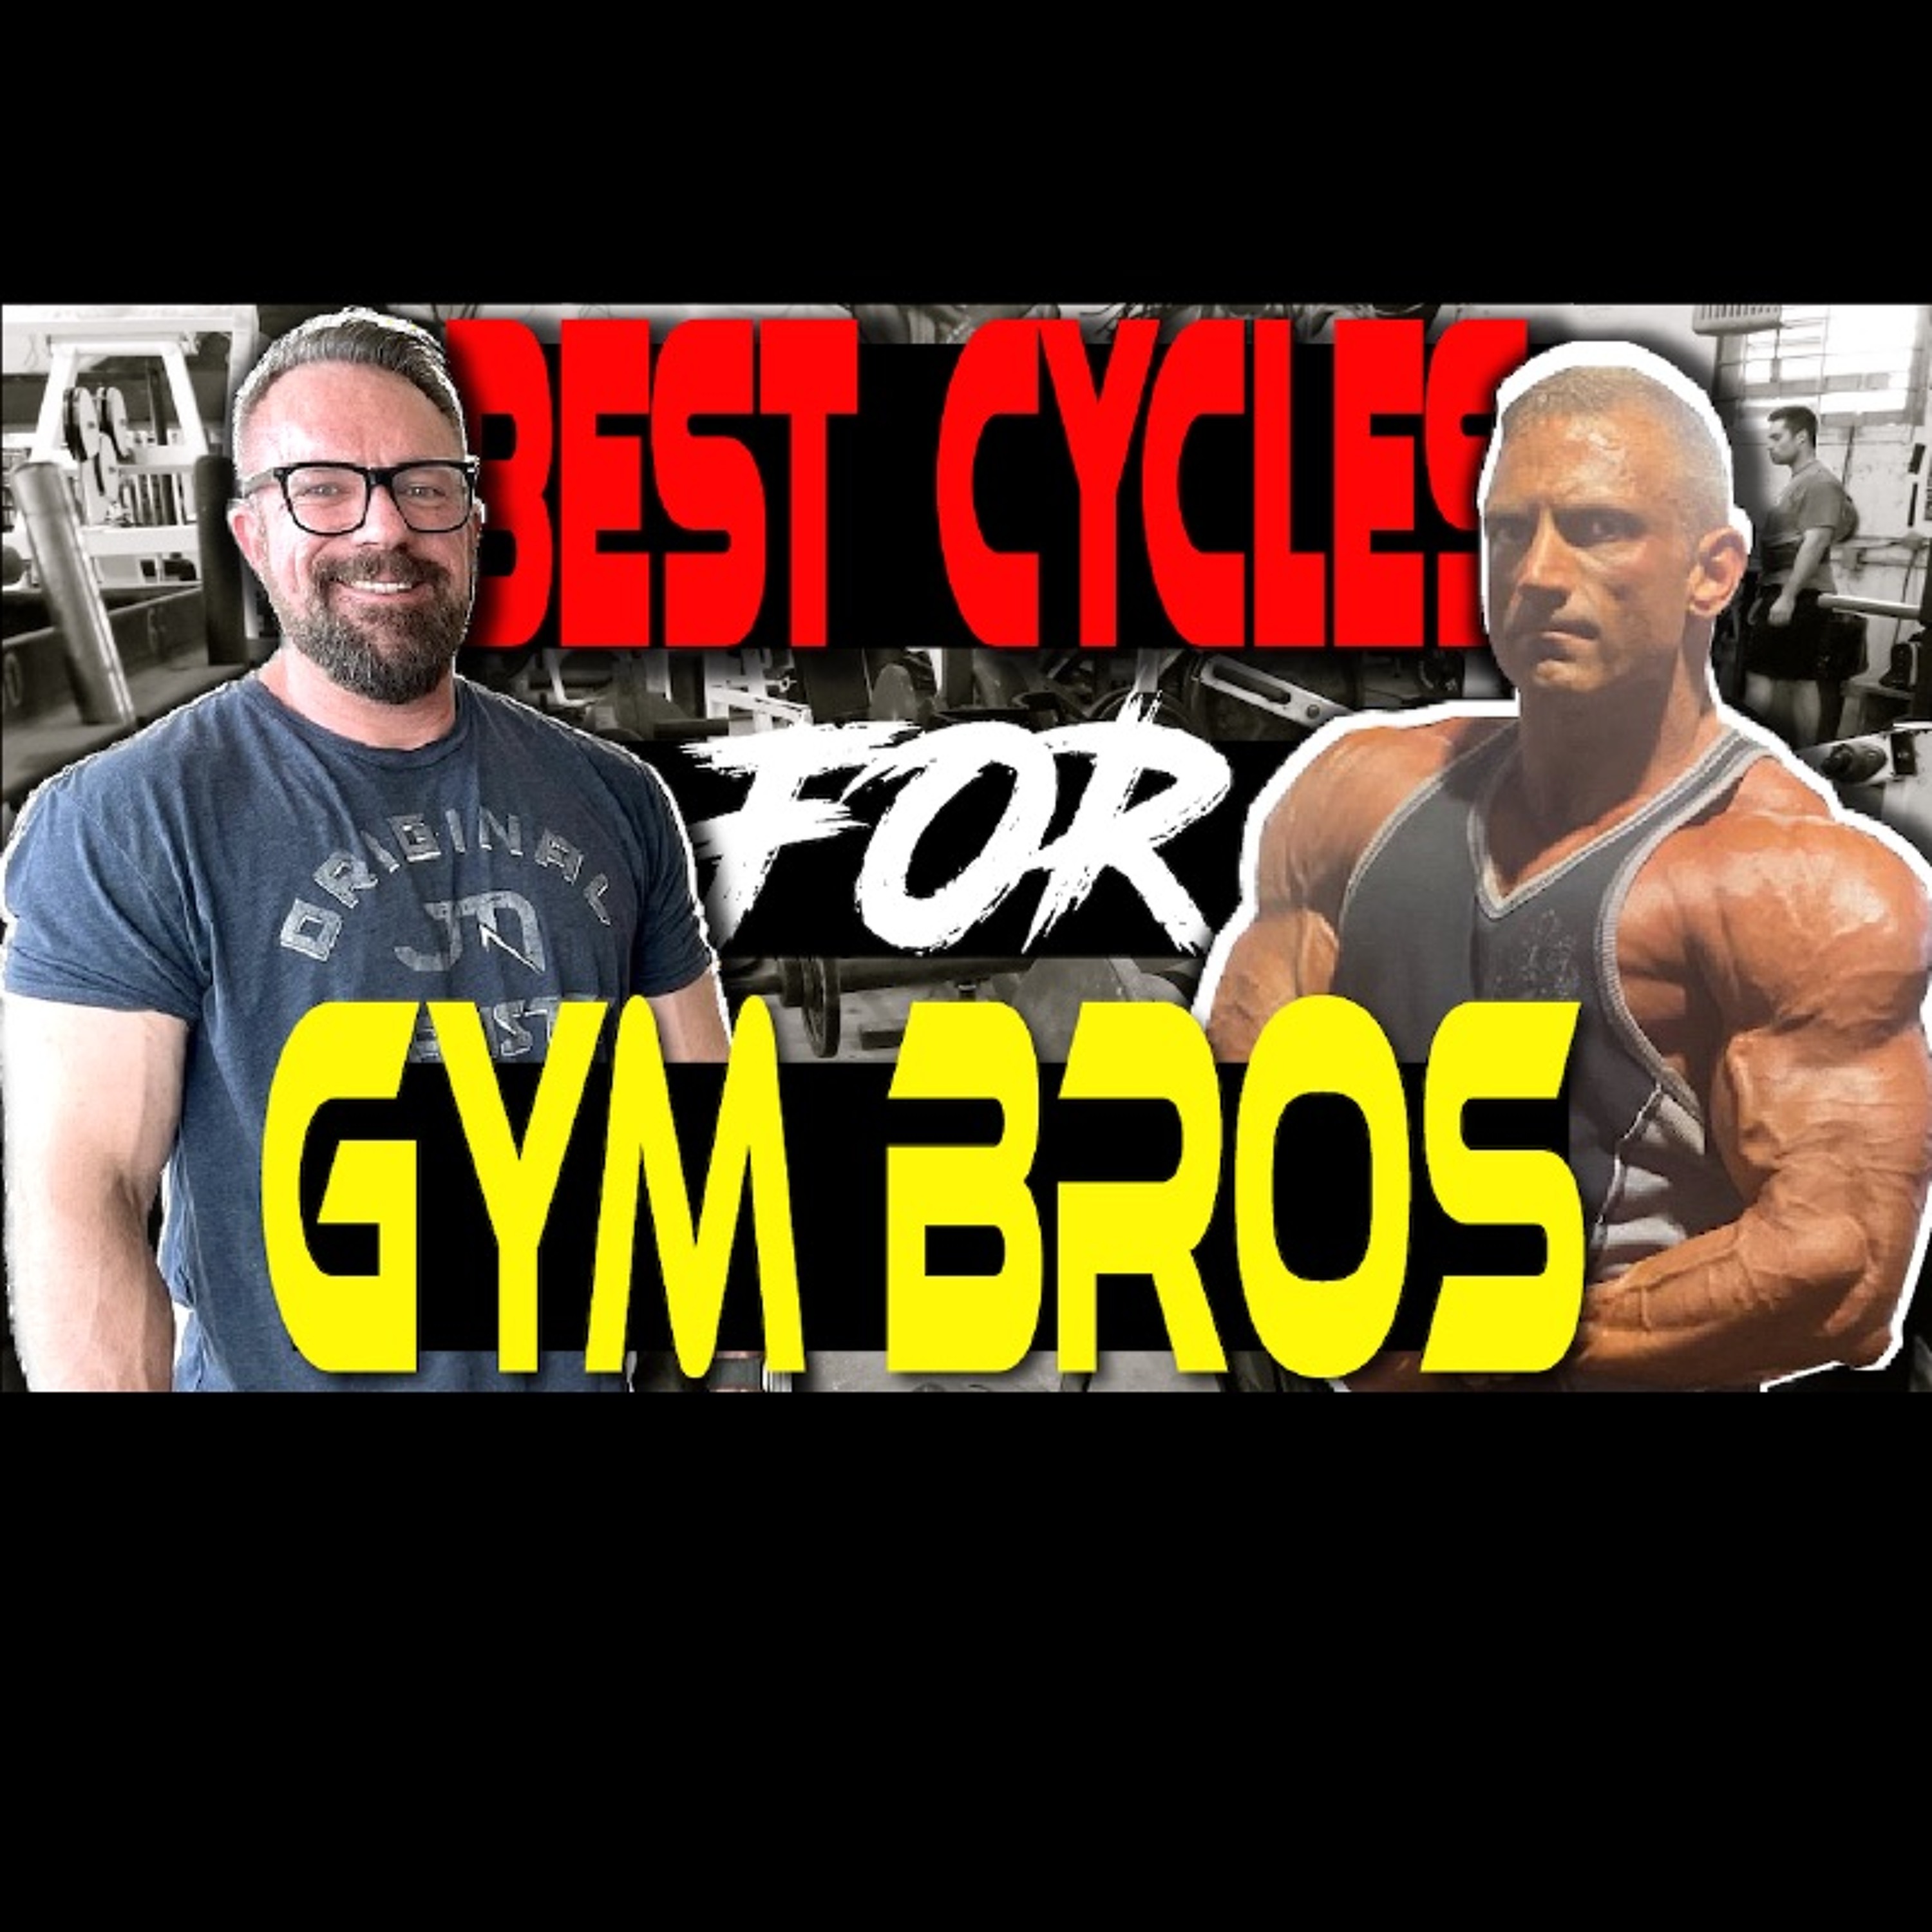 Blood Sweat & Gear 210 BEST CYCLES for Gym Bros